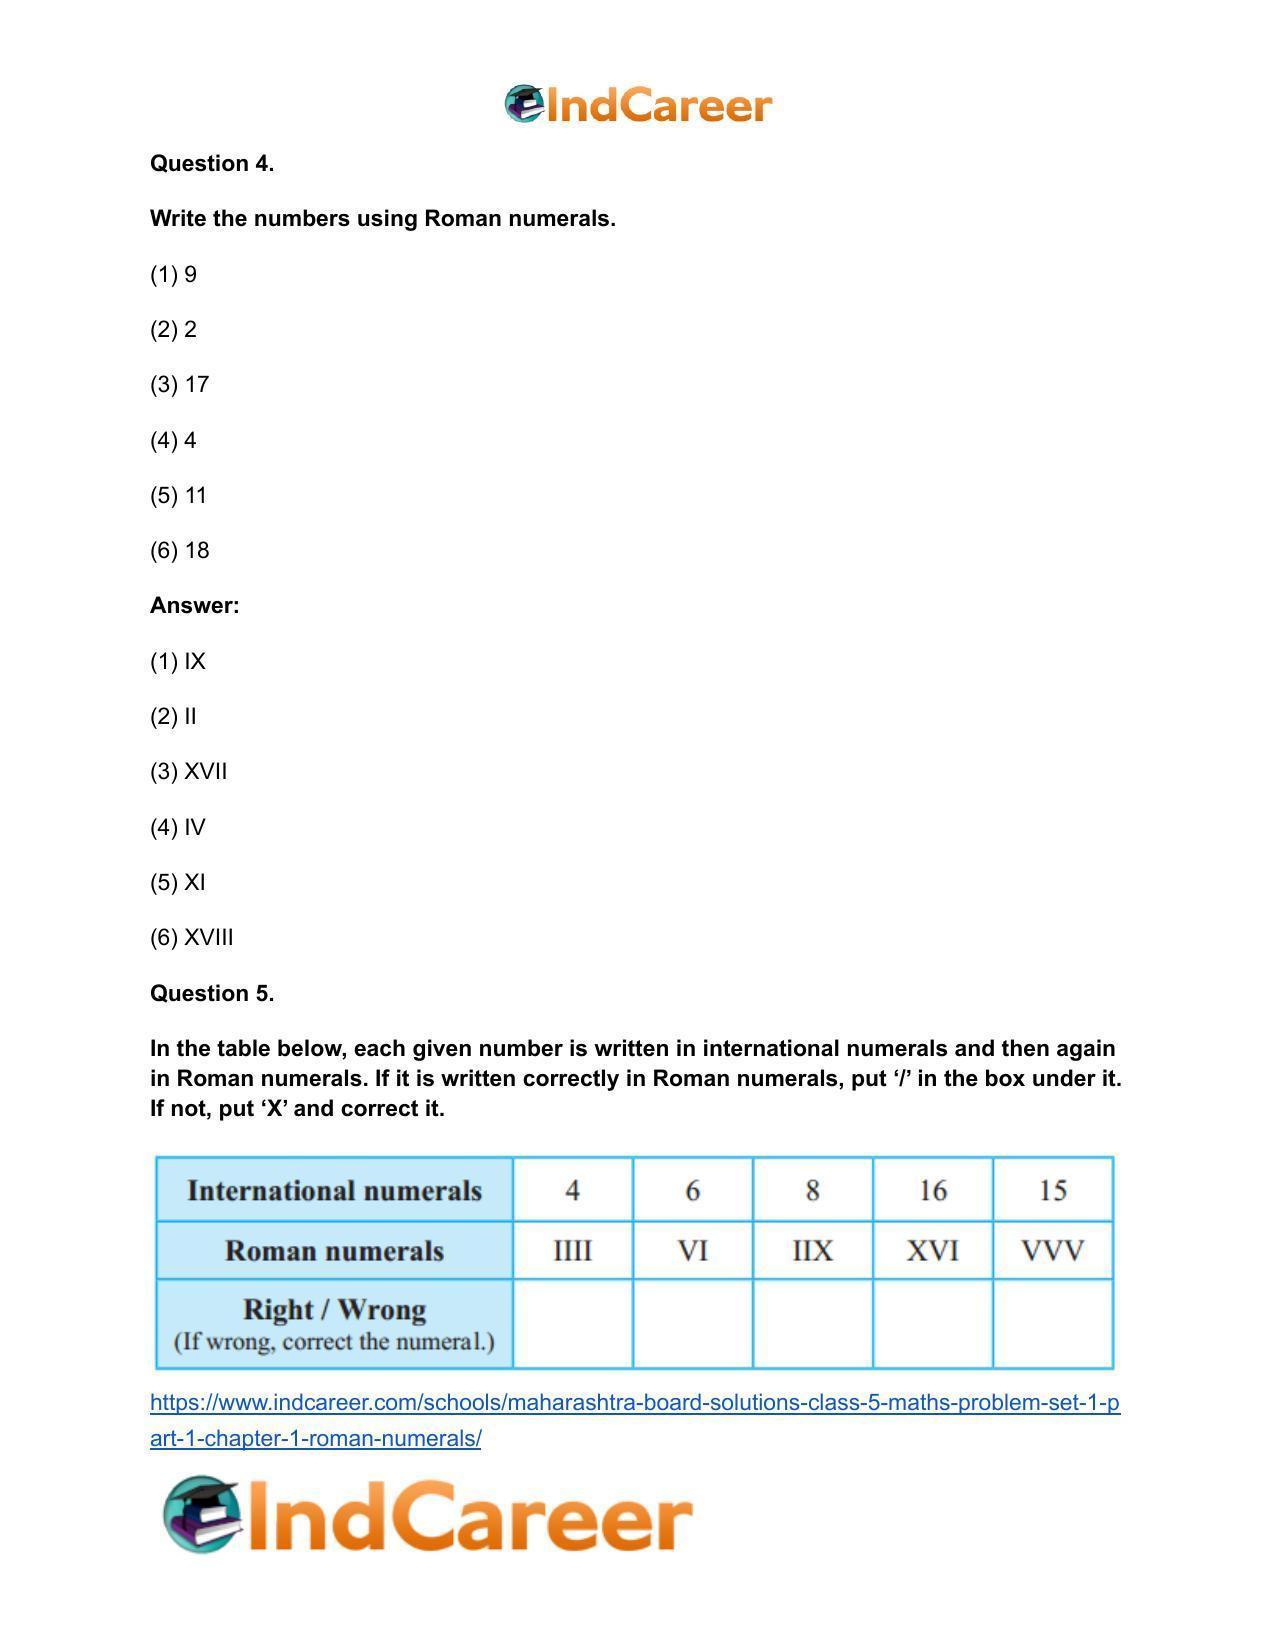 Maharashtra Board Solutions Class 5-Maths (Problem Set 1) - Part 1: Chapter 1- Roman Numerals - Page 4